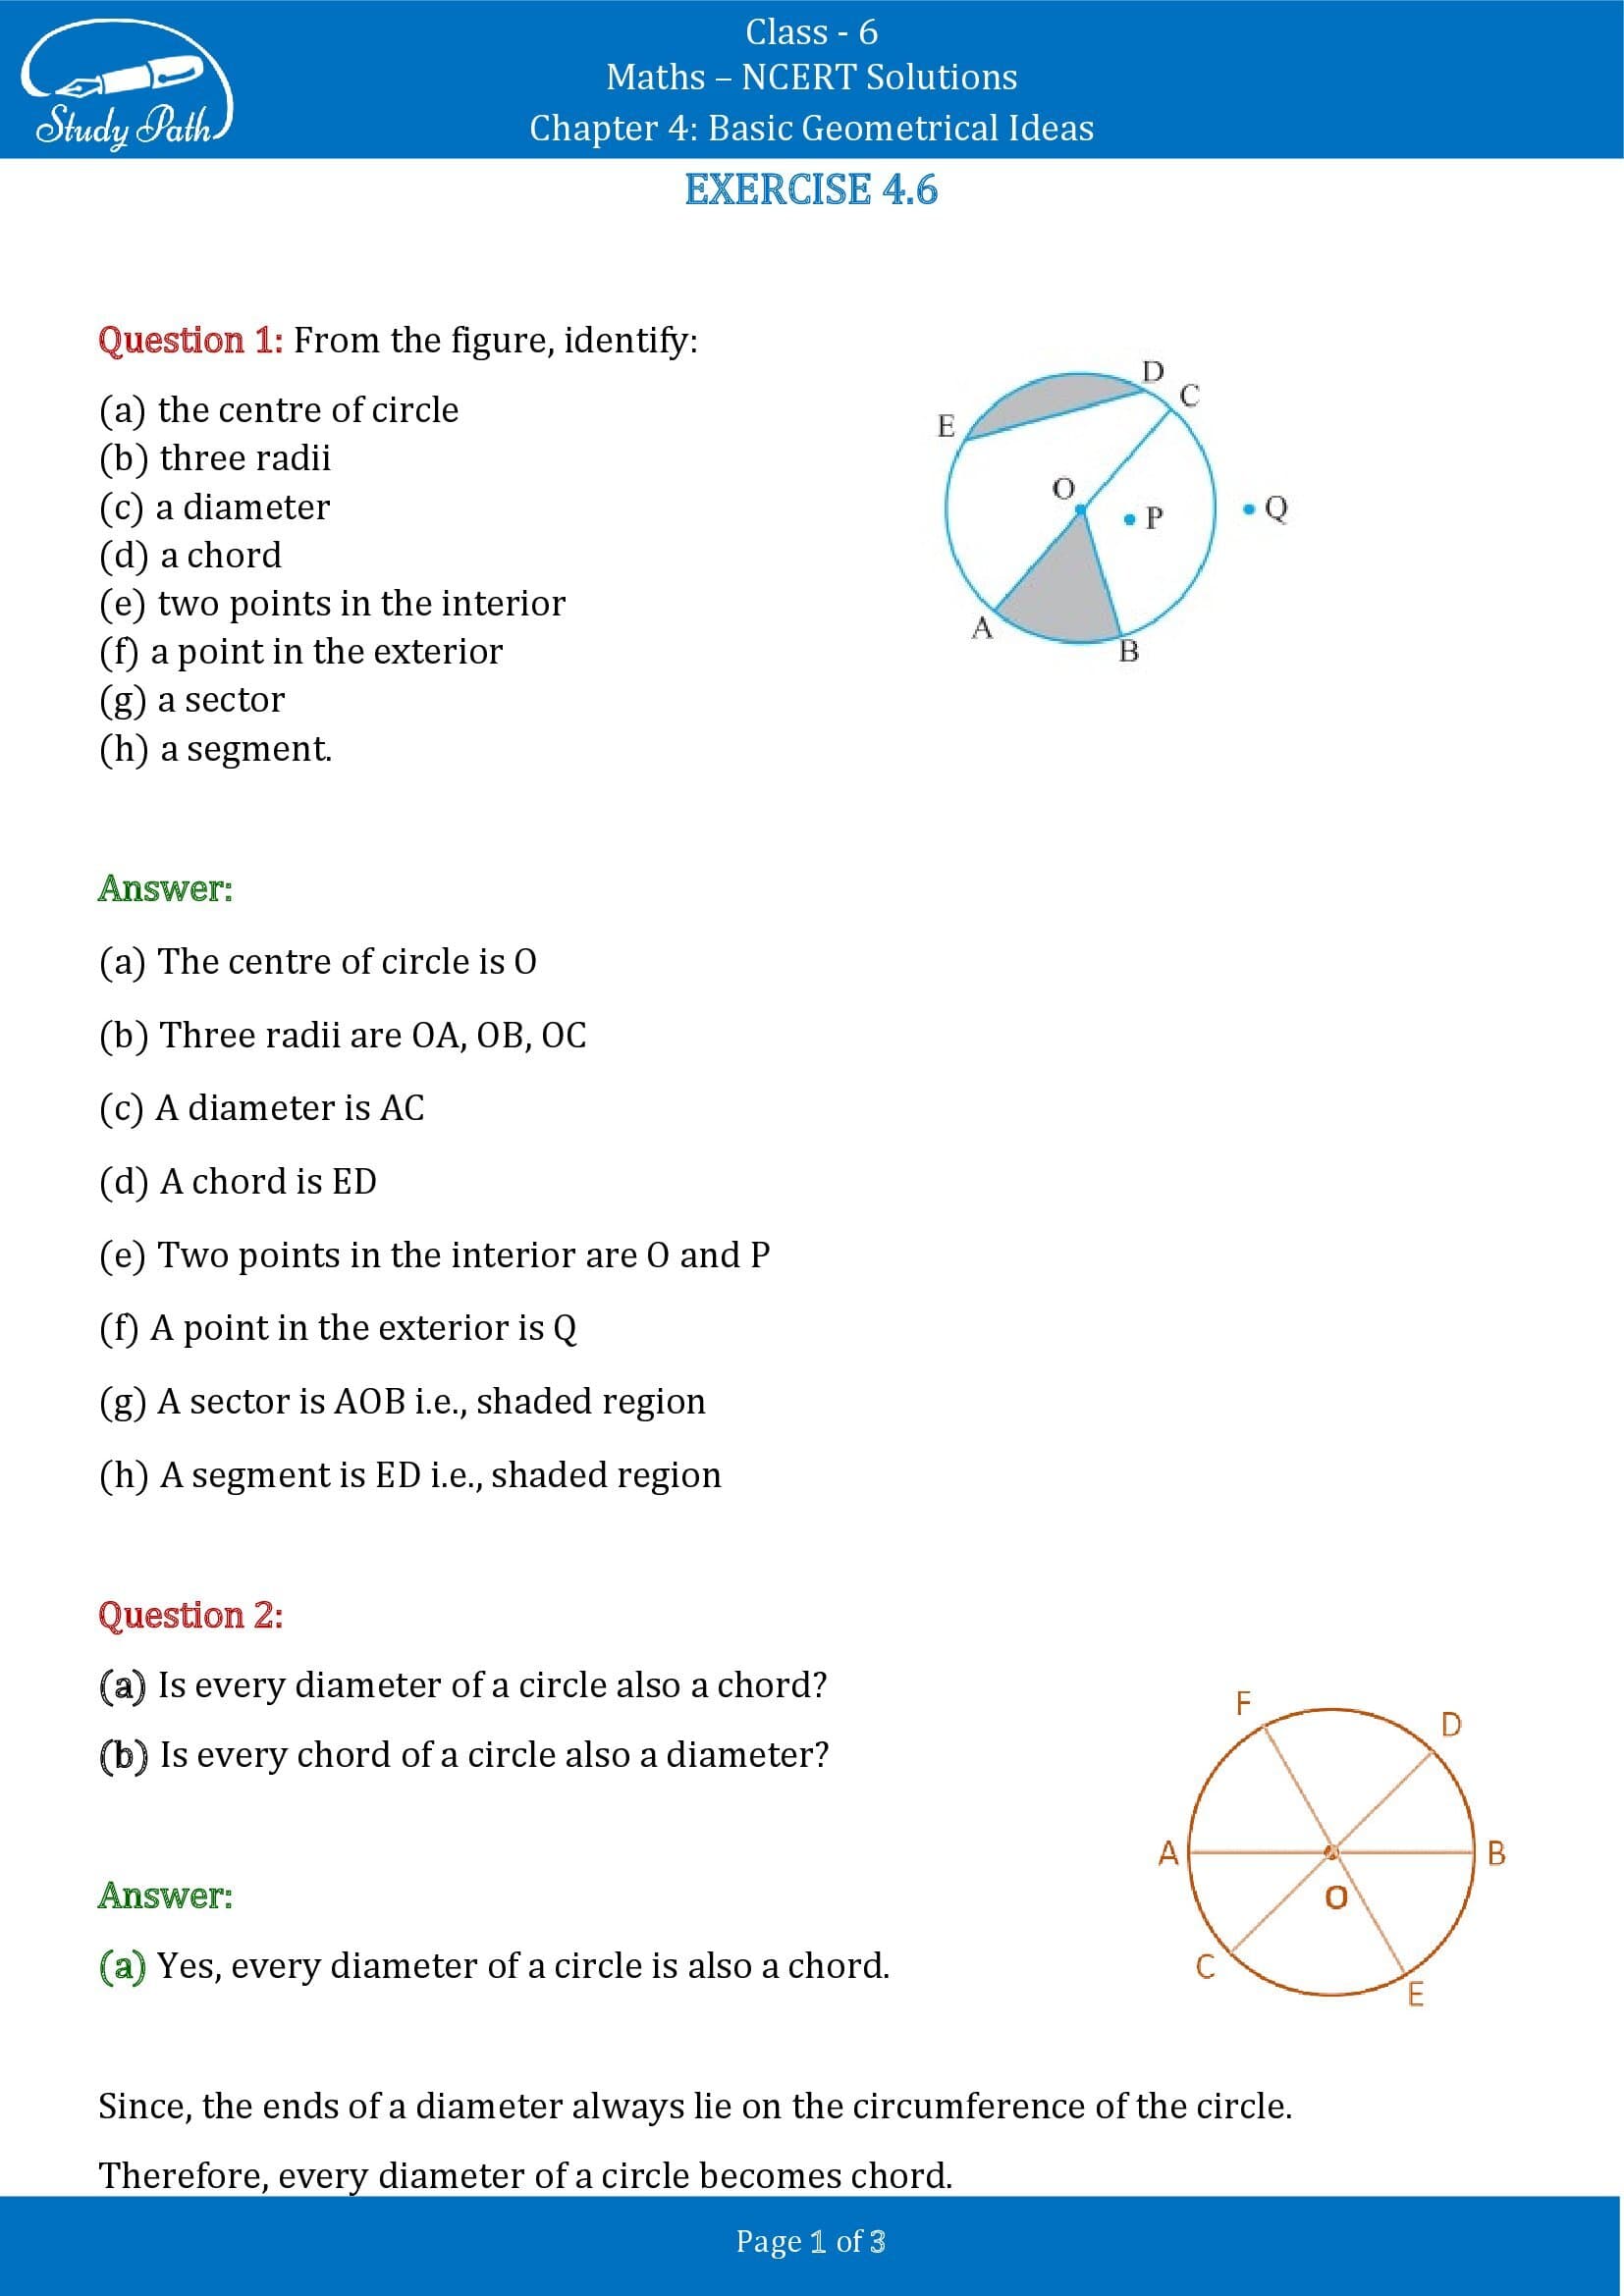 NCERT Solutions for Class 6 Maths Chapter 4 Basic Geometrical Ideas Exercise 4.6 00001